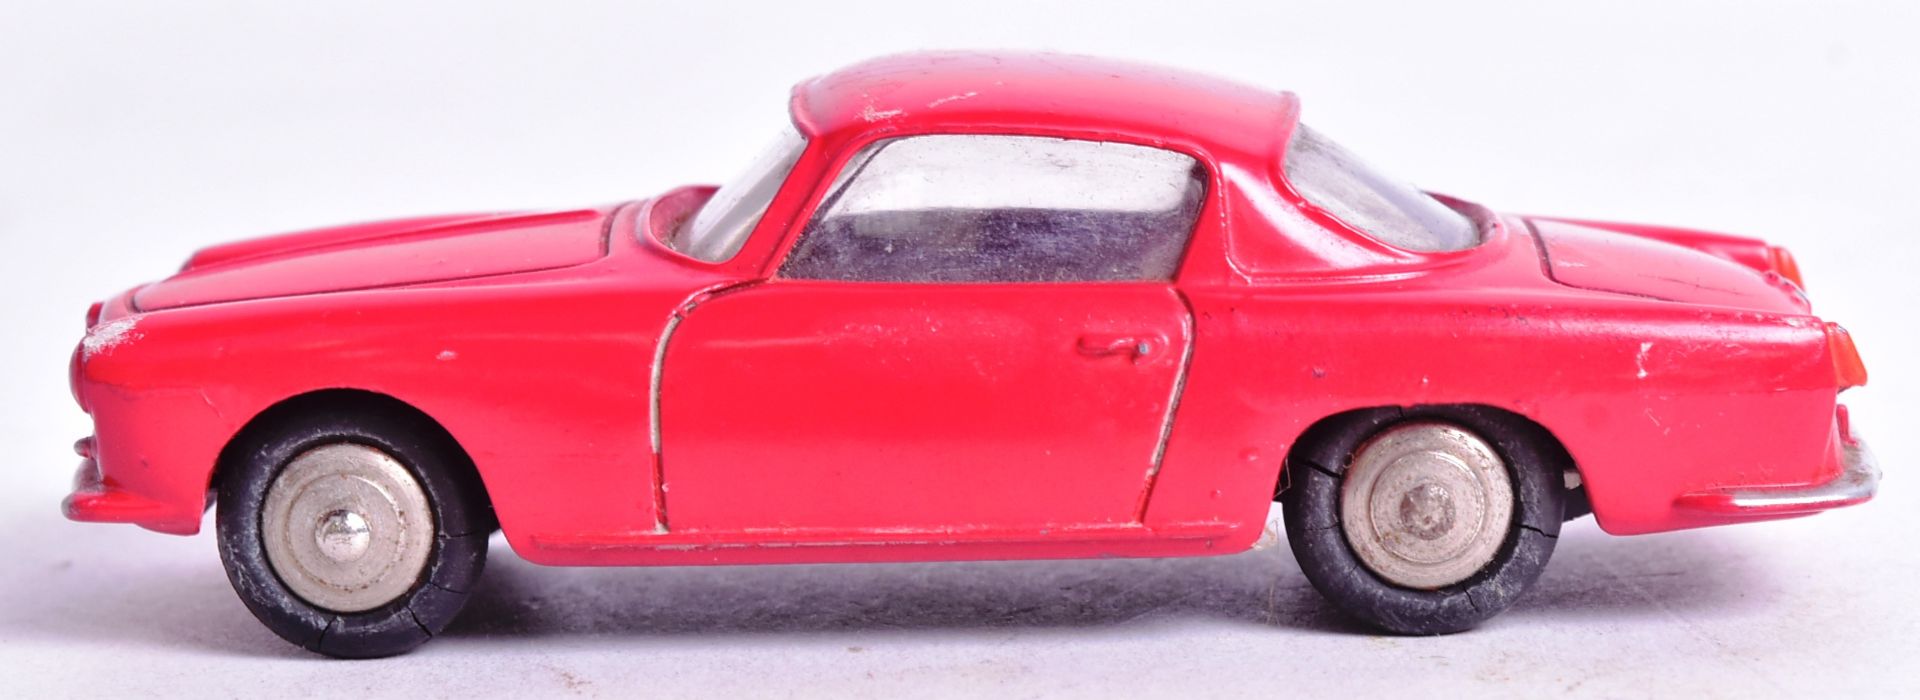 DIECAST - FRENCH DINKY TOYS - COUPE ALFA ROMEO - Image 2 of 5